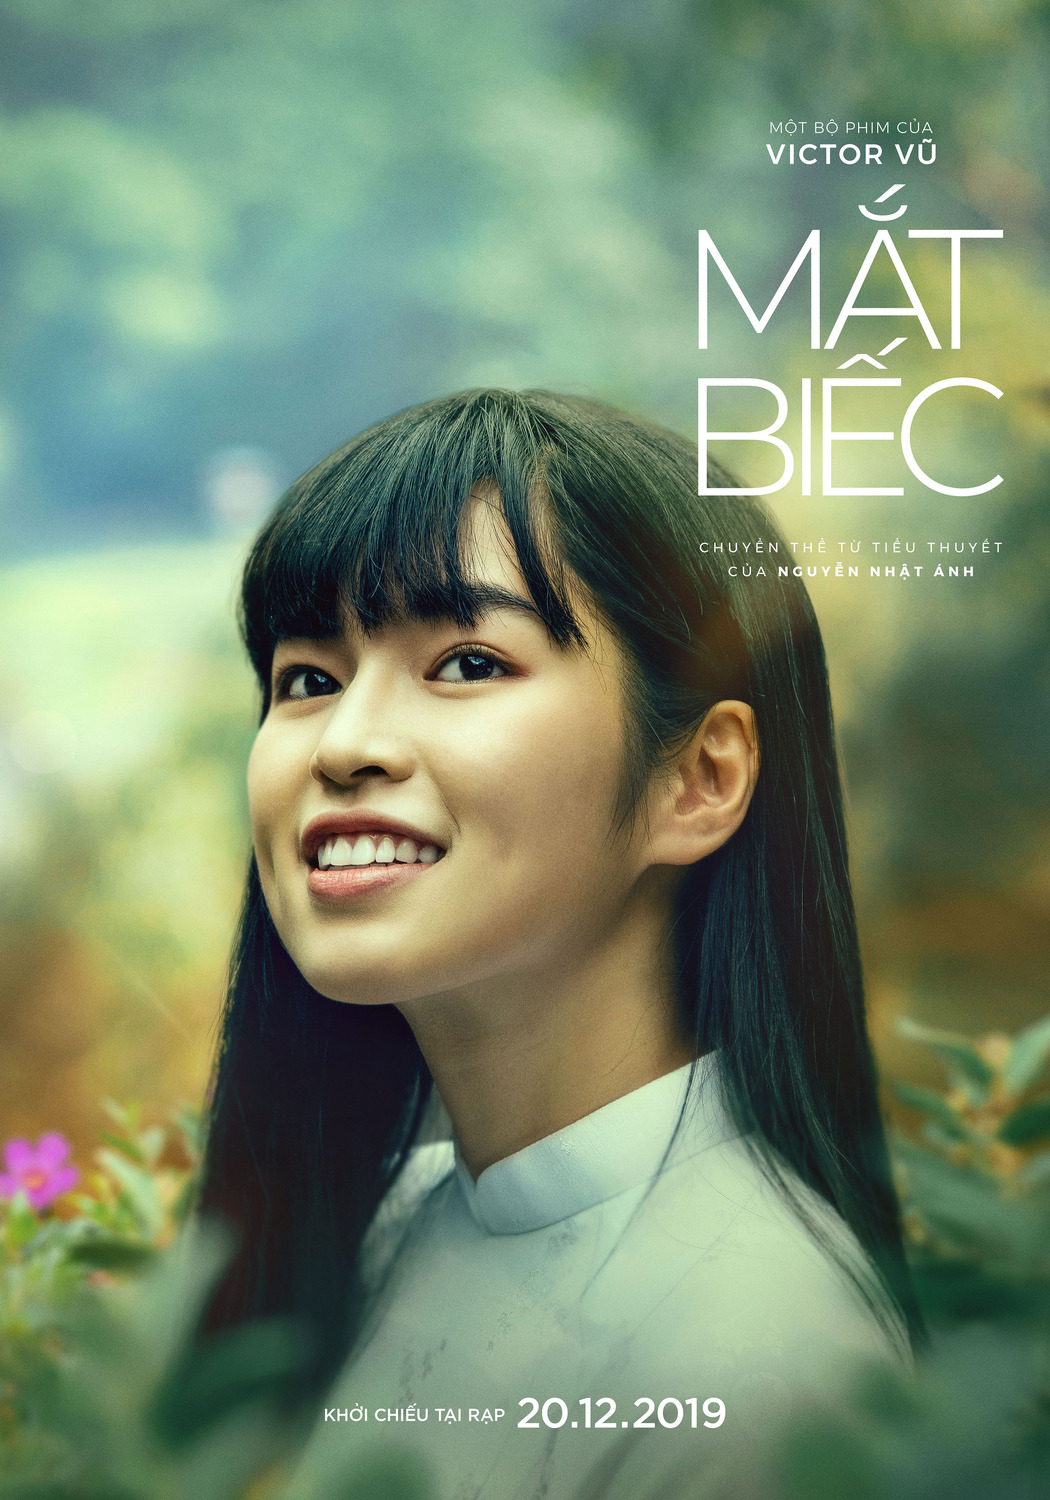 Extra Large Movie Poster Image for Mat biec (#14 of 15)